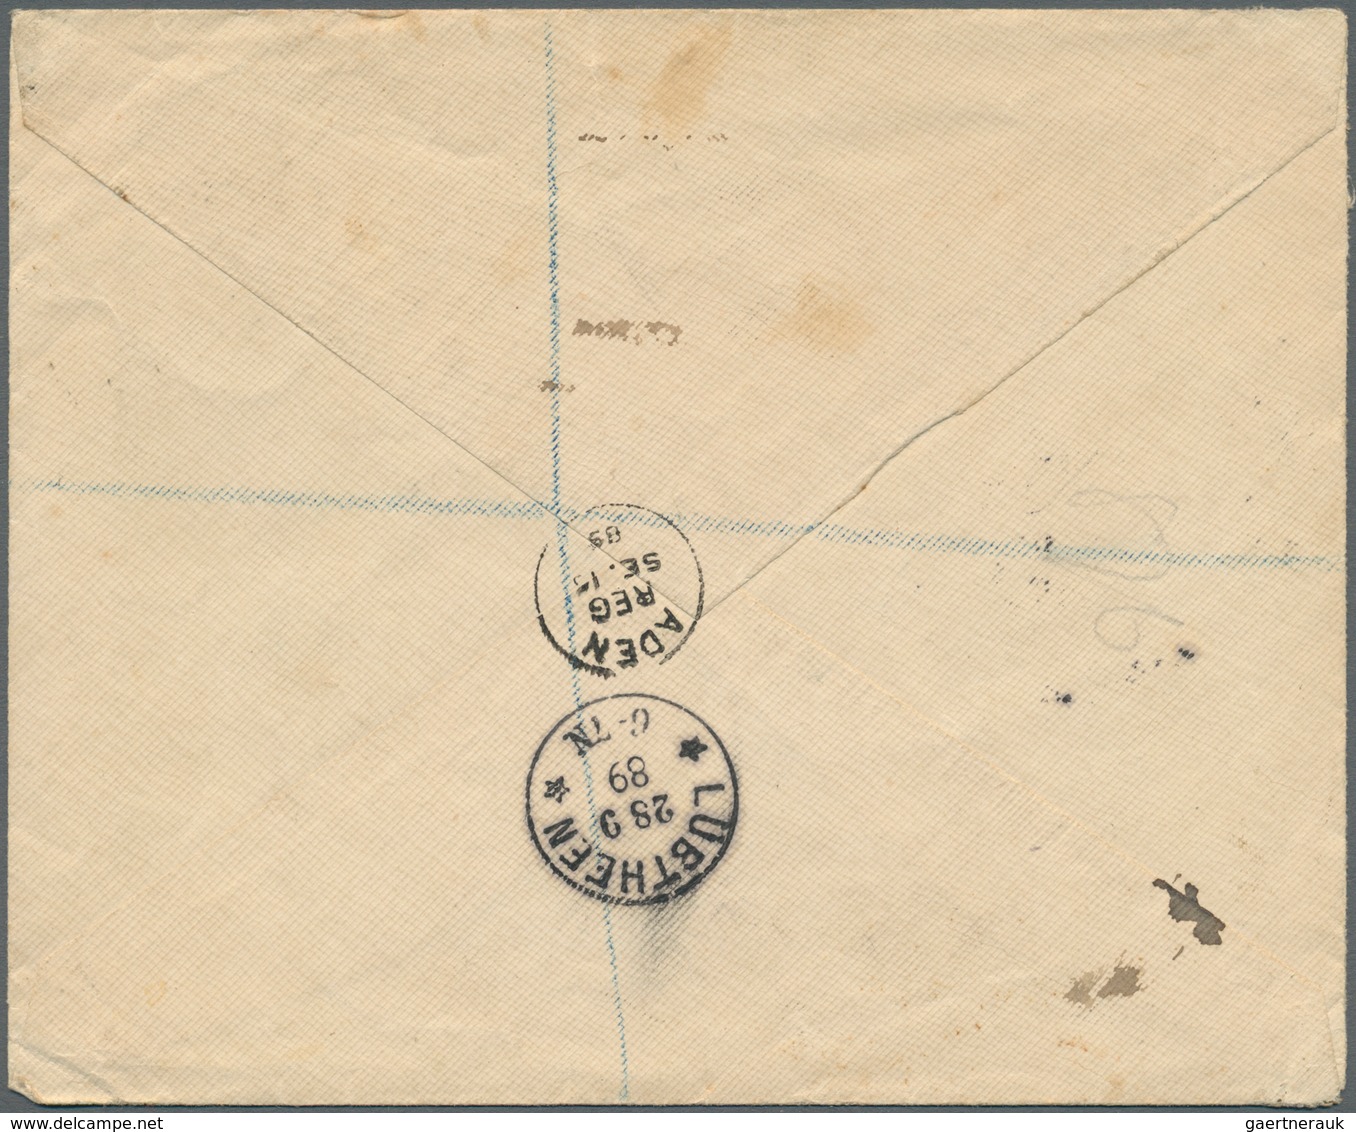 Aden: ADEN 1889: Registered Cover From Aden To Lübtheen, Mecklenburg, Germany Franked With India QV - Yemen